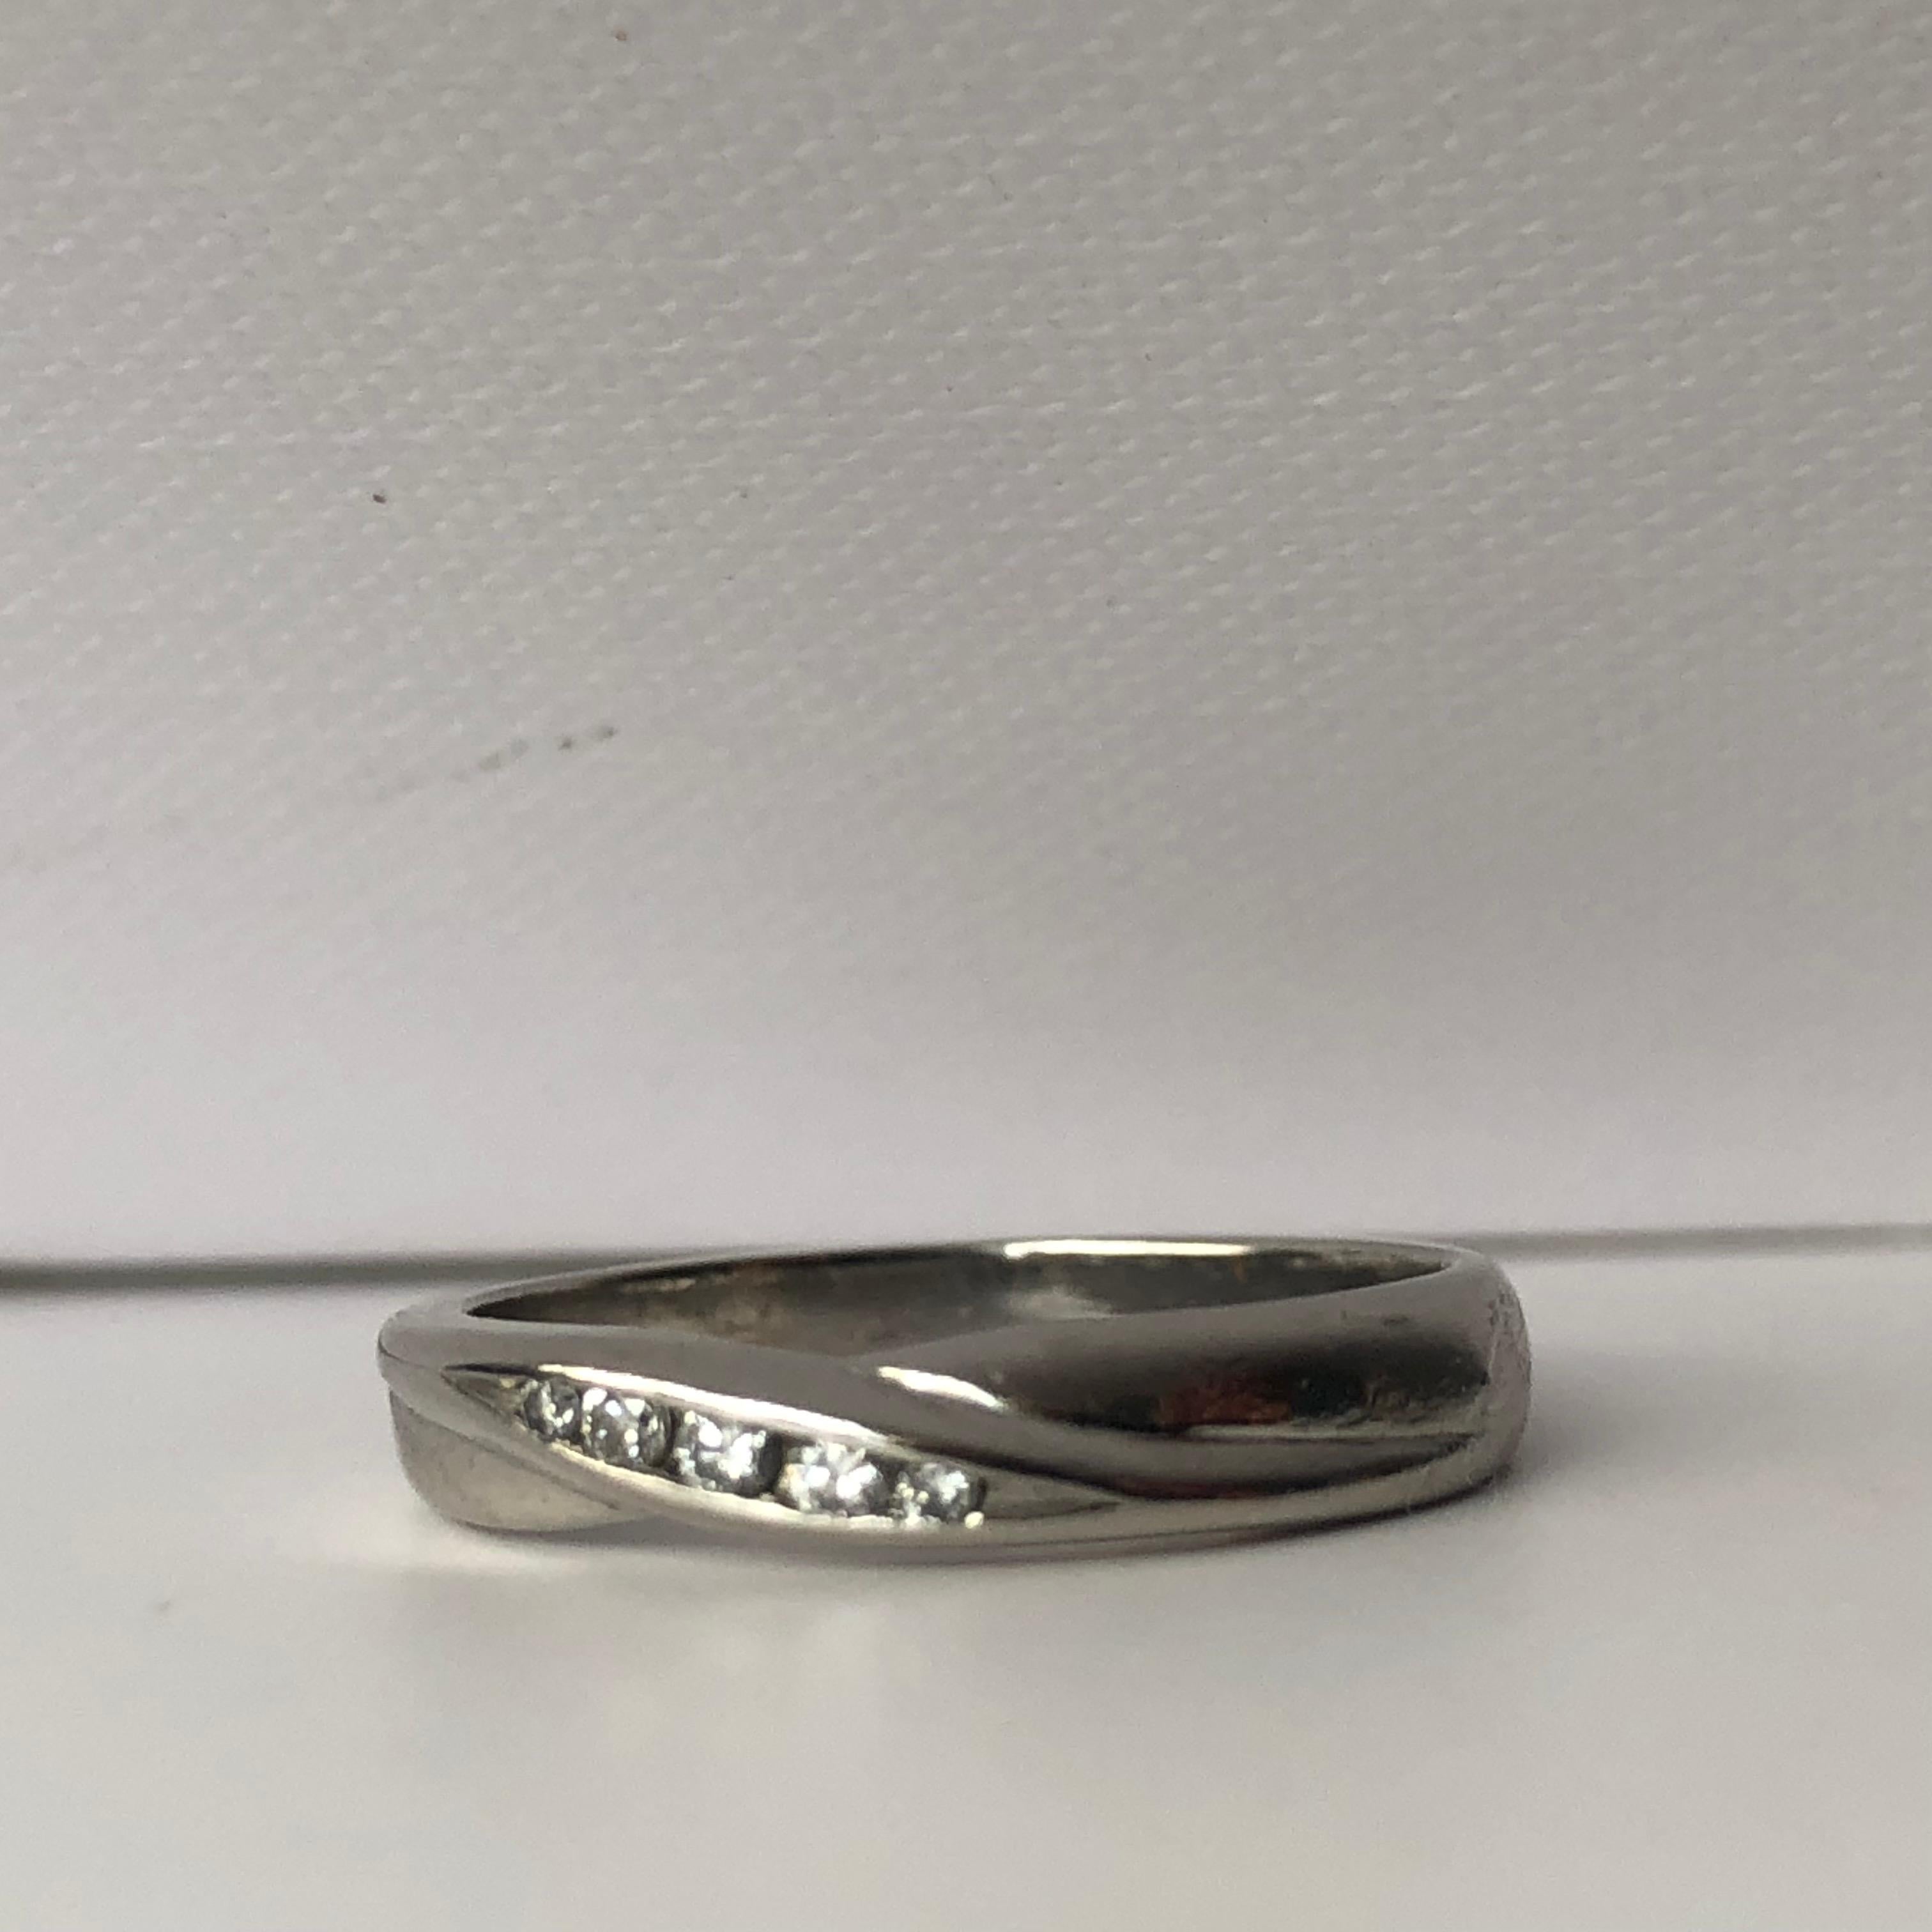 A Platinum & Diamond Wedding band

A Modern Slight Twist To The Diamond Setting 

Total White Brilliant Cut Diamond Weight .10ct 

Size L - Can Be sized for £20 